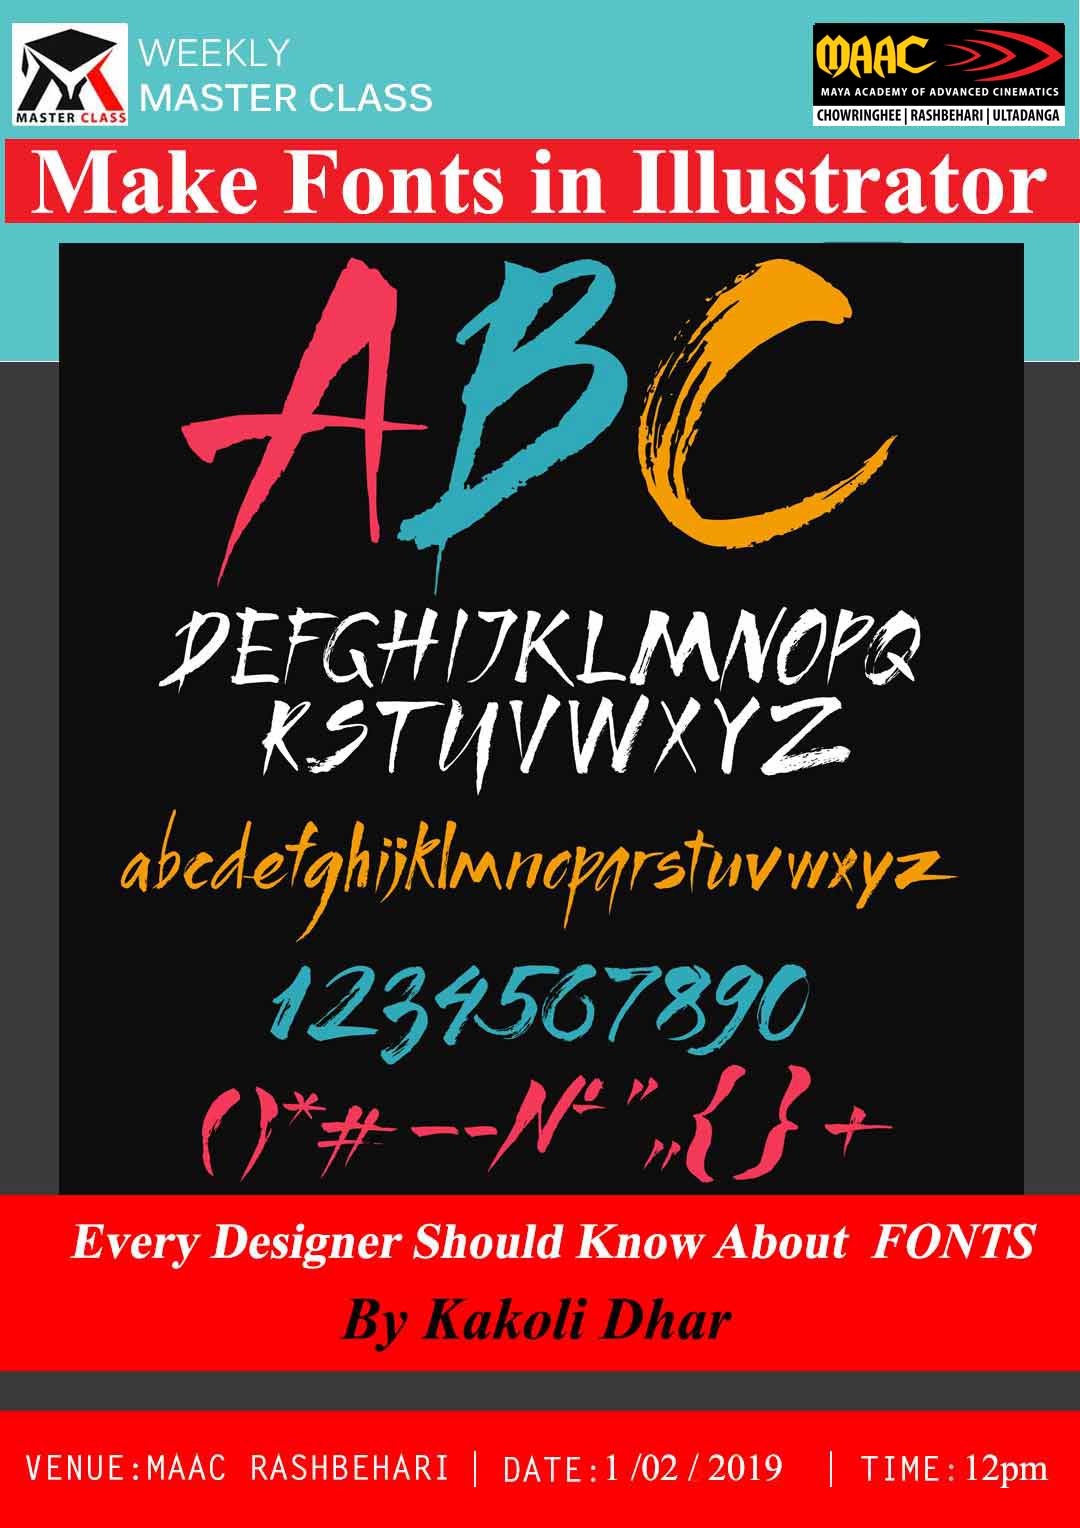 Weekly Master Class on Make Fonts in Illustrator